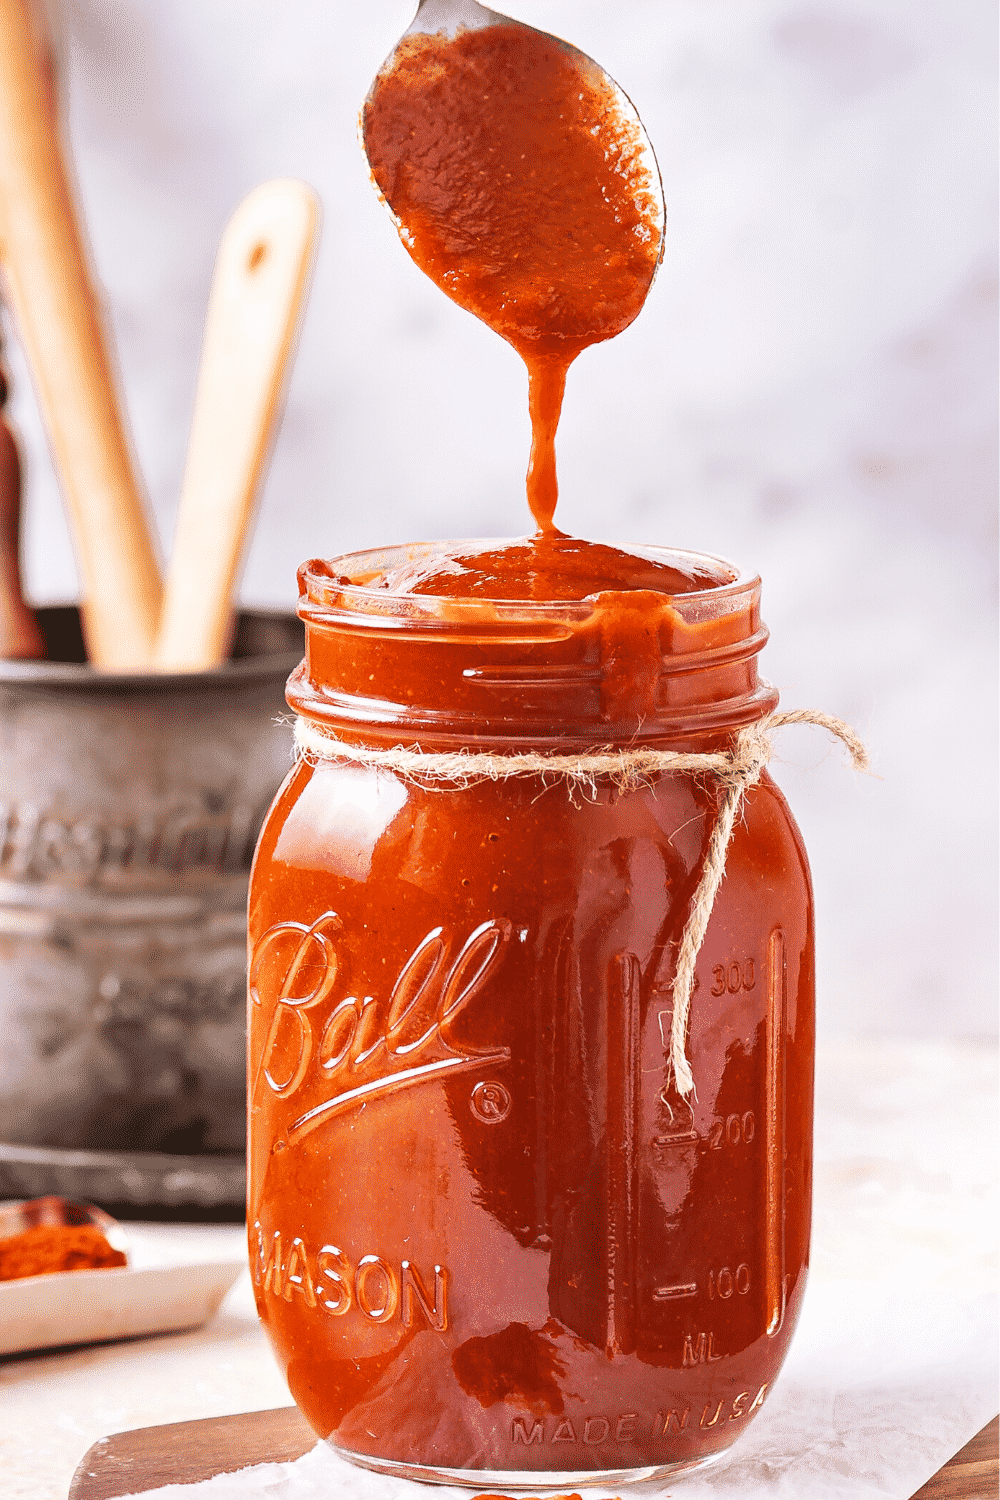 A glass jar filled to the top with BBQ sauce. A head of a spoon is dripping BBQ sauce from it into the top of the jar.